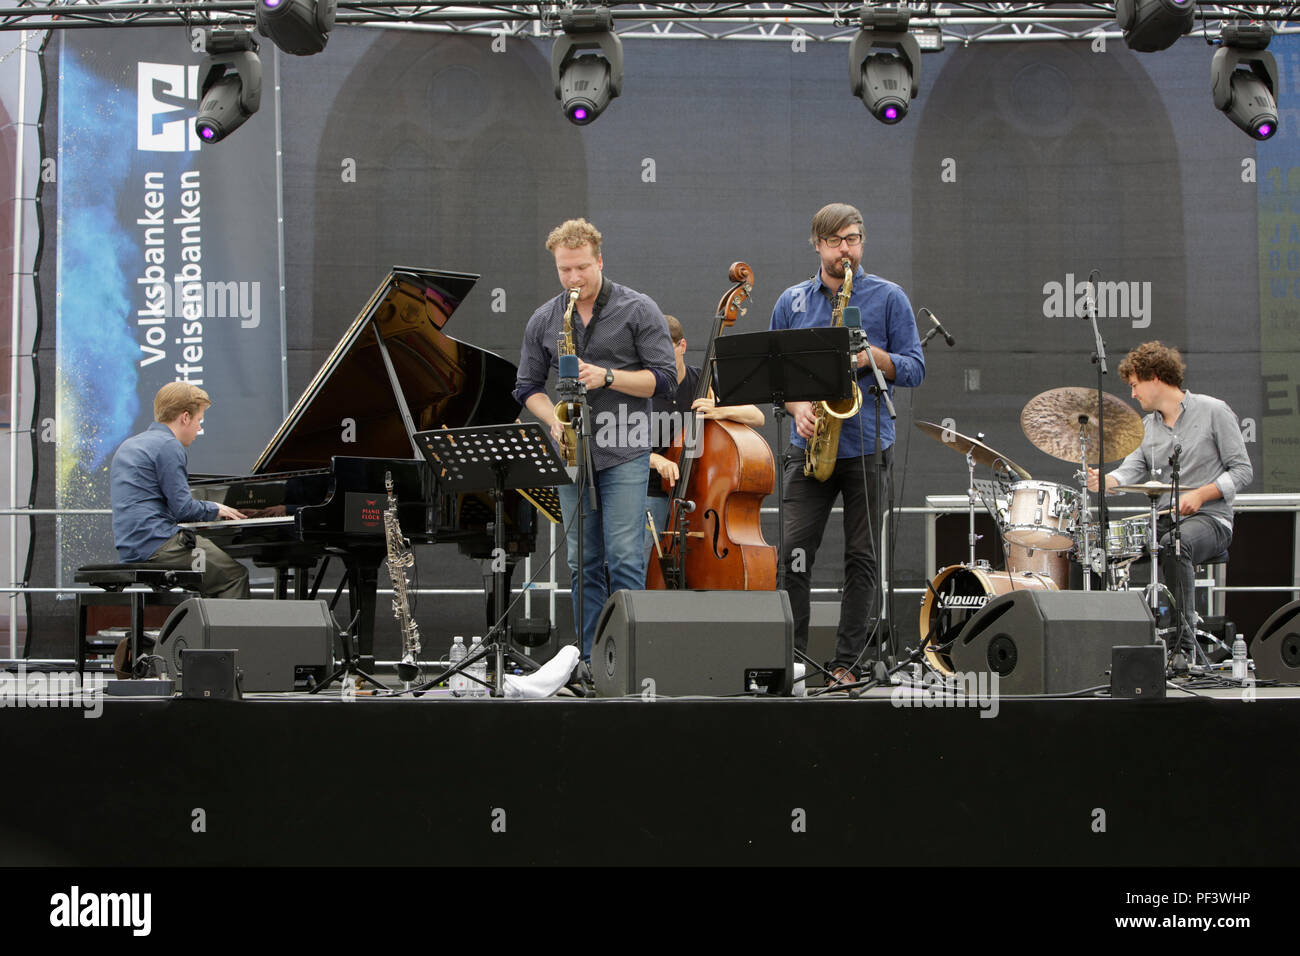 Worms, Germany. 18th Aug, 2018. The Volker Engelberth Quintett, pianist Volker Engelbert, saxophonist Bastian Stein, bassist Arne Huber, saxophonist Alexander ‘Sandi' Kuhn and drummer Silvio Morger from left to right, perform live at the 2018 Jazz and Joy Festival in Worms in Germany. Credit: Michael Debets/Pacific Press/Alamy Live News Stock Photo